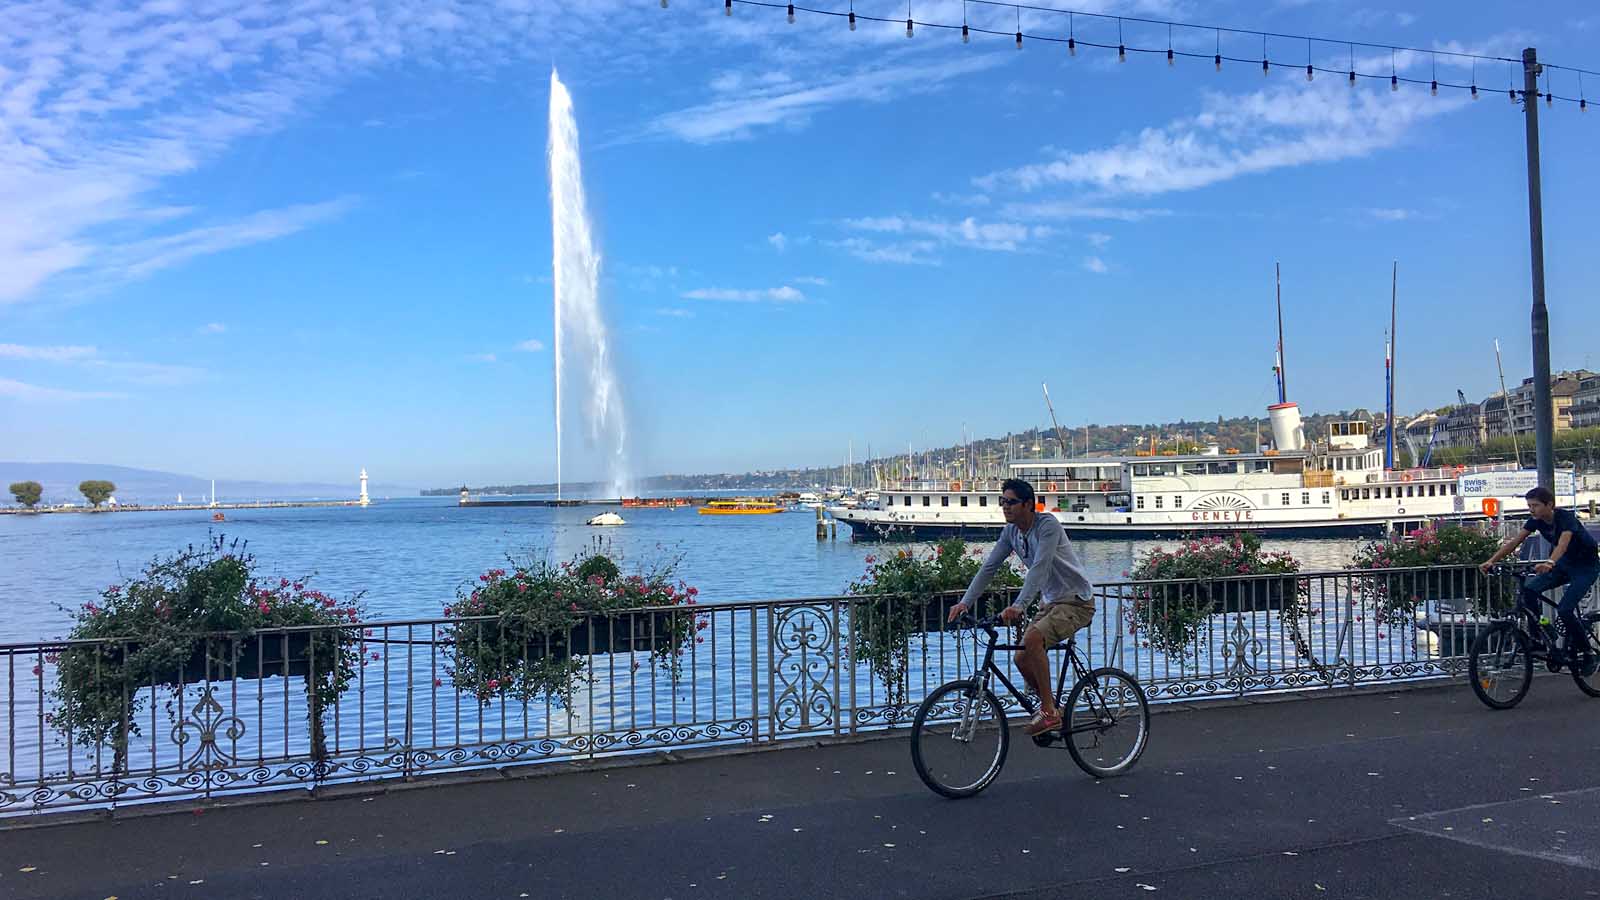 two men biking along the Geneva lake shore with the Geneva Jet d'eau (Geneva Fountain) and a white boat in the background